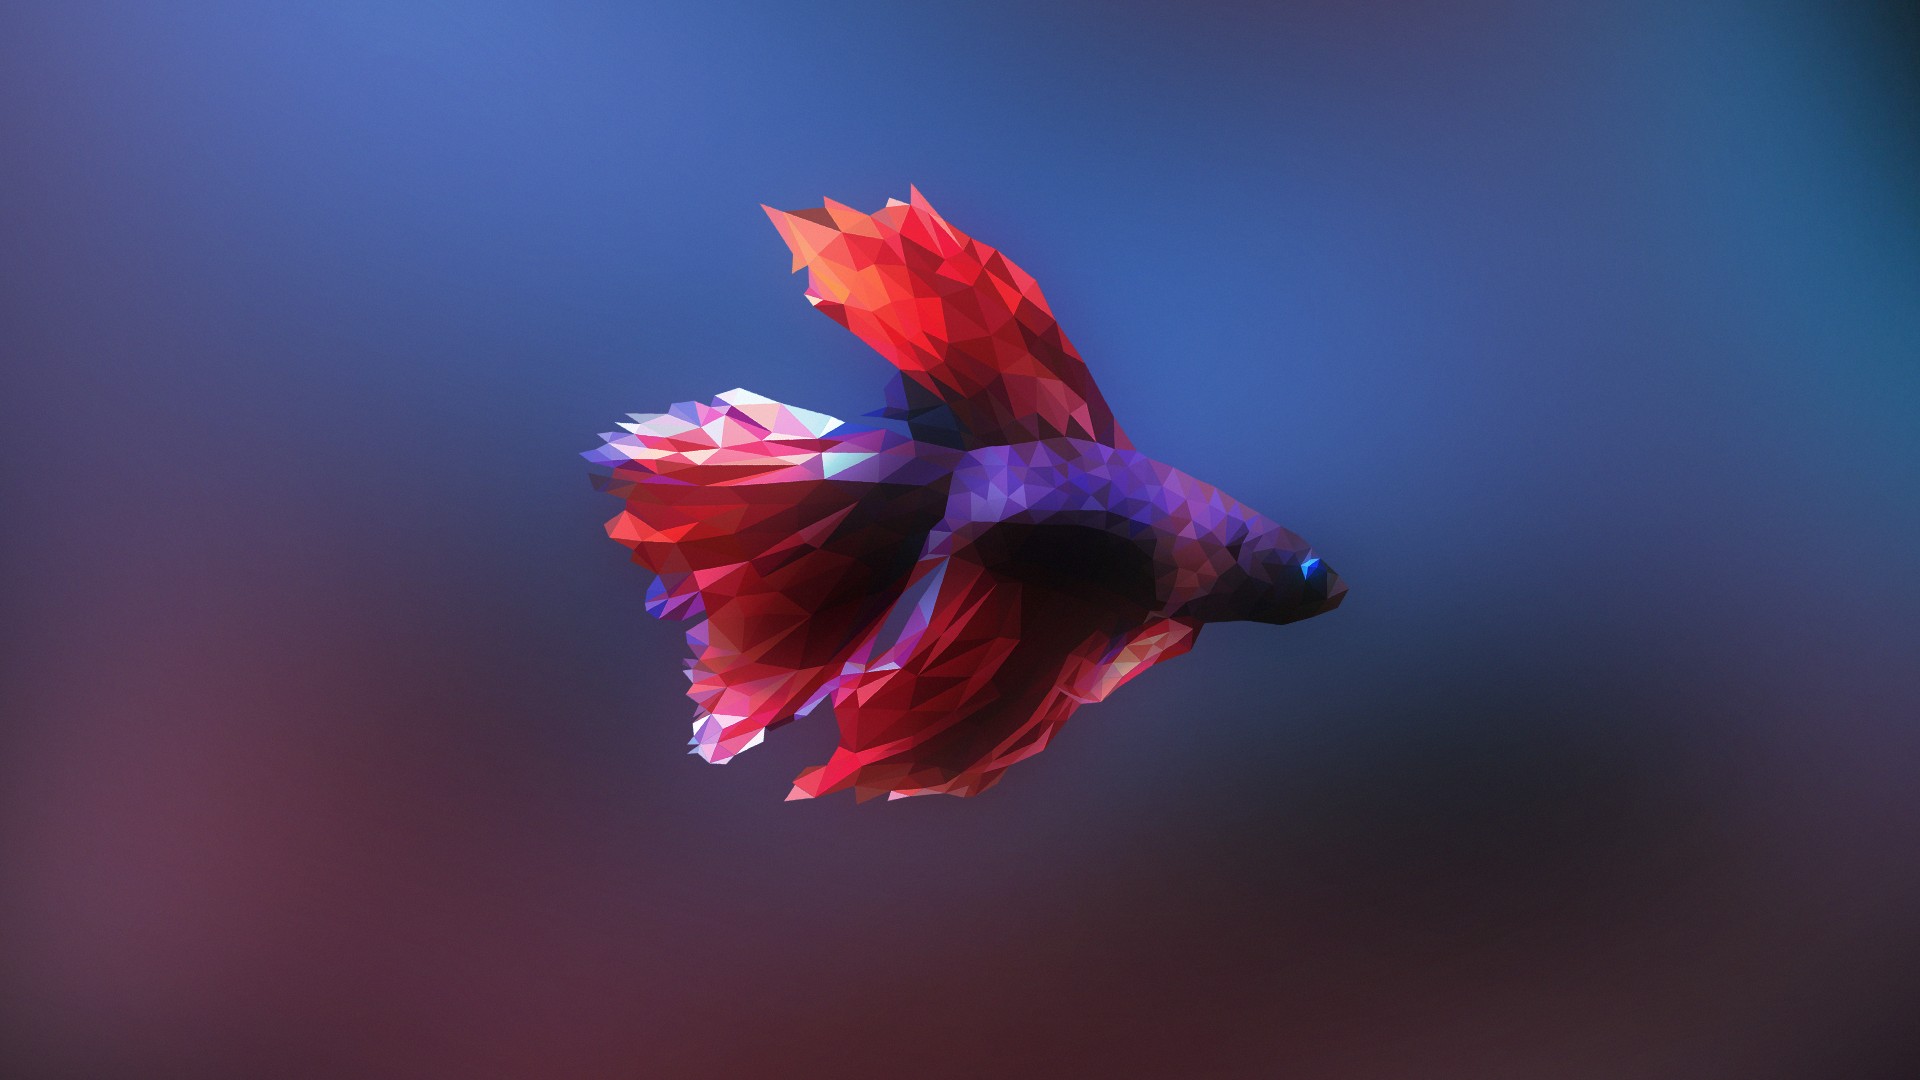 Siamese fighting fish, Fish, Low poly Wallpaper